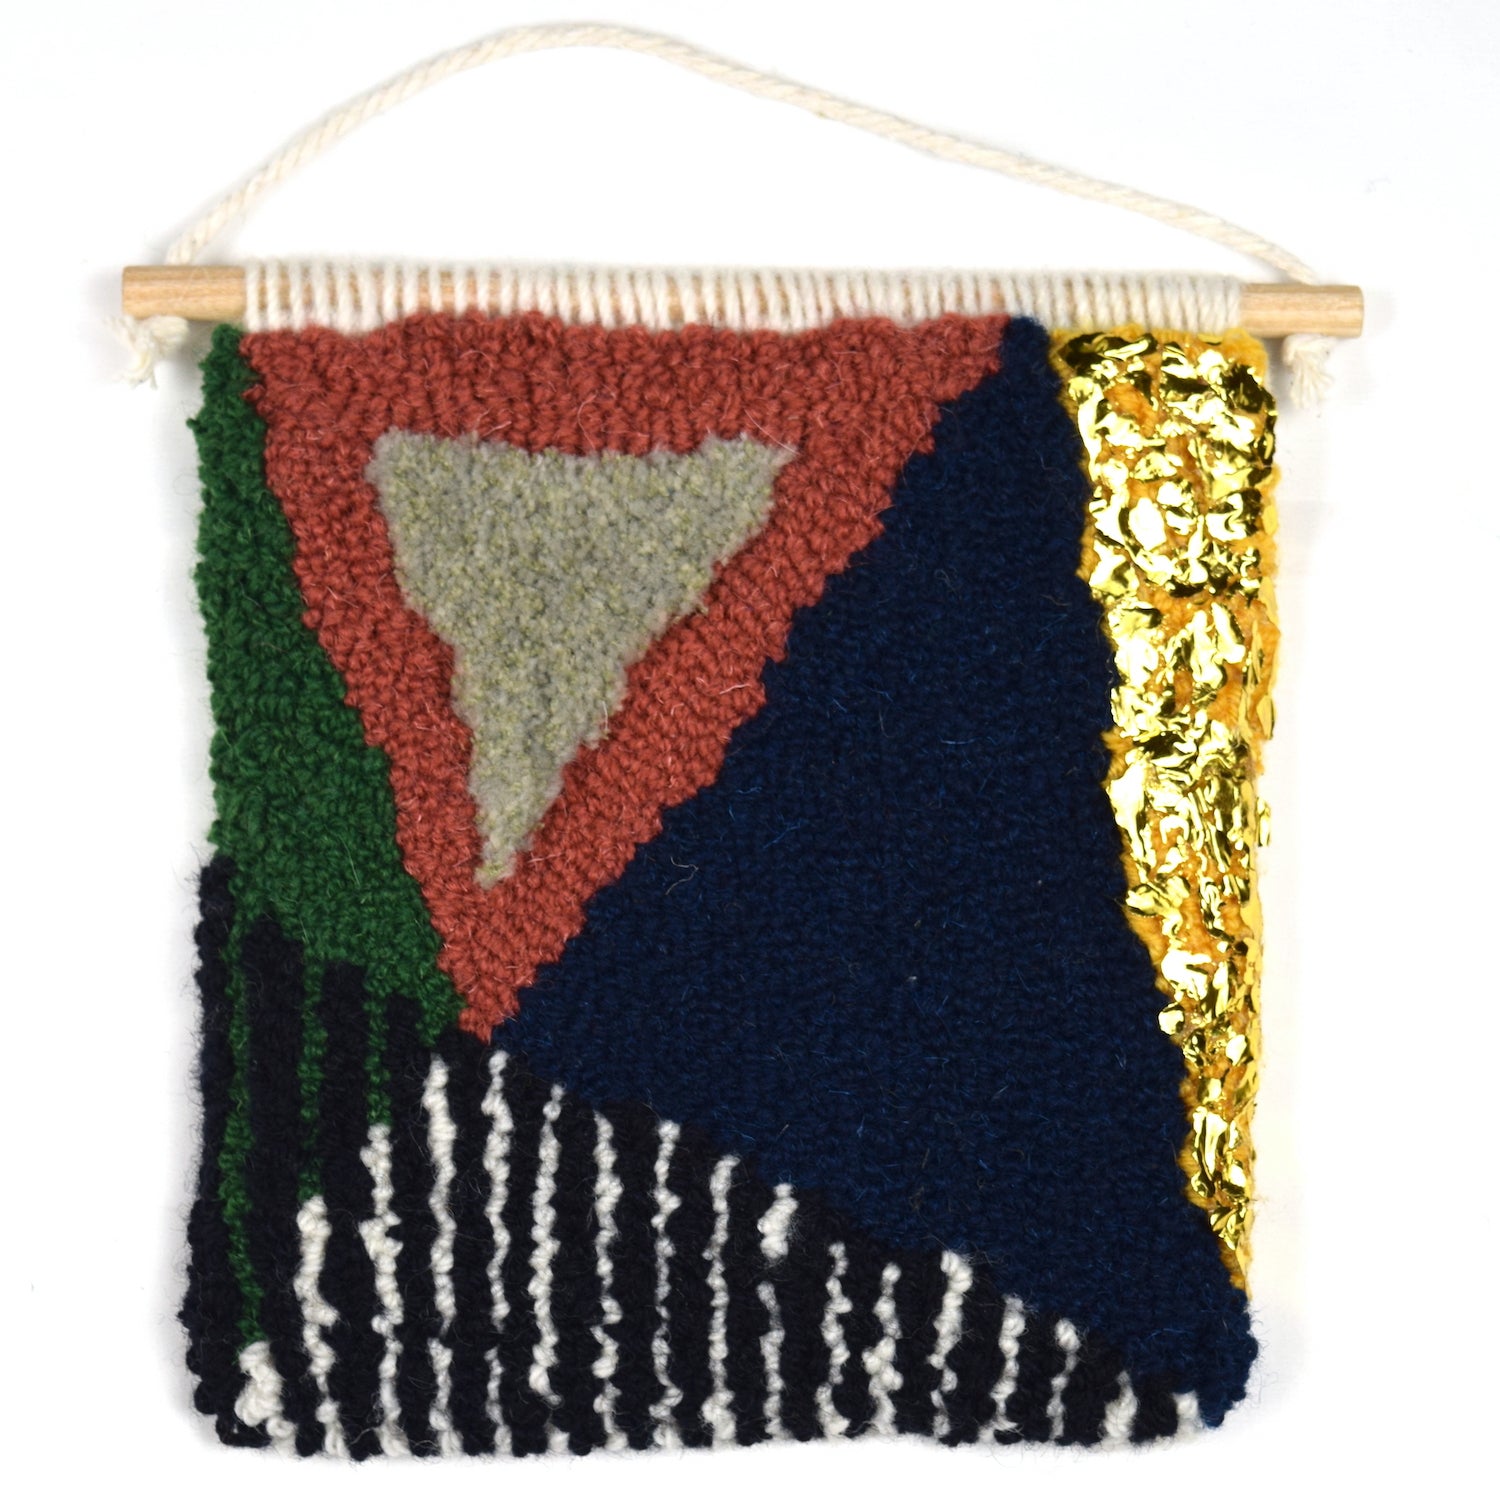 A fun mixture of FRAGMENT triangular shaped pieces created using British Wool and Reclaimed Yarns in a mixture of loop and cut piles and glorious gold accents. Coral, Khaki, Green, Navy and Yellow with a Black and White stripe.